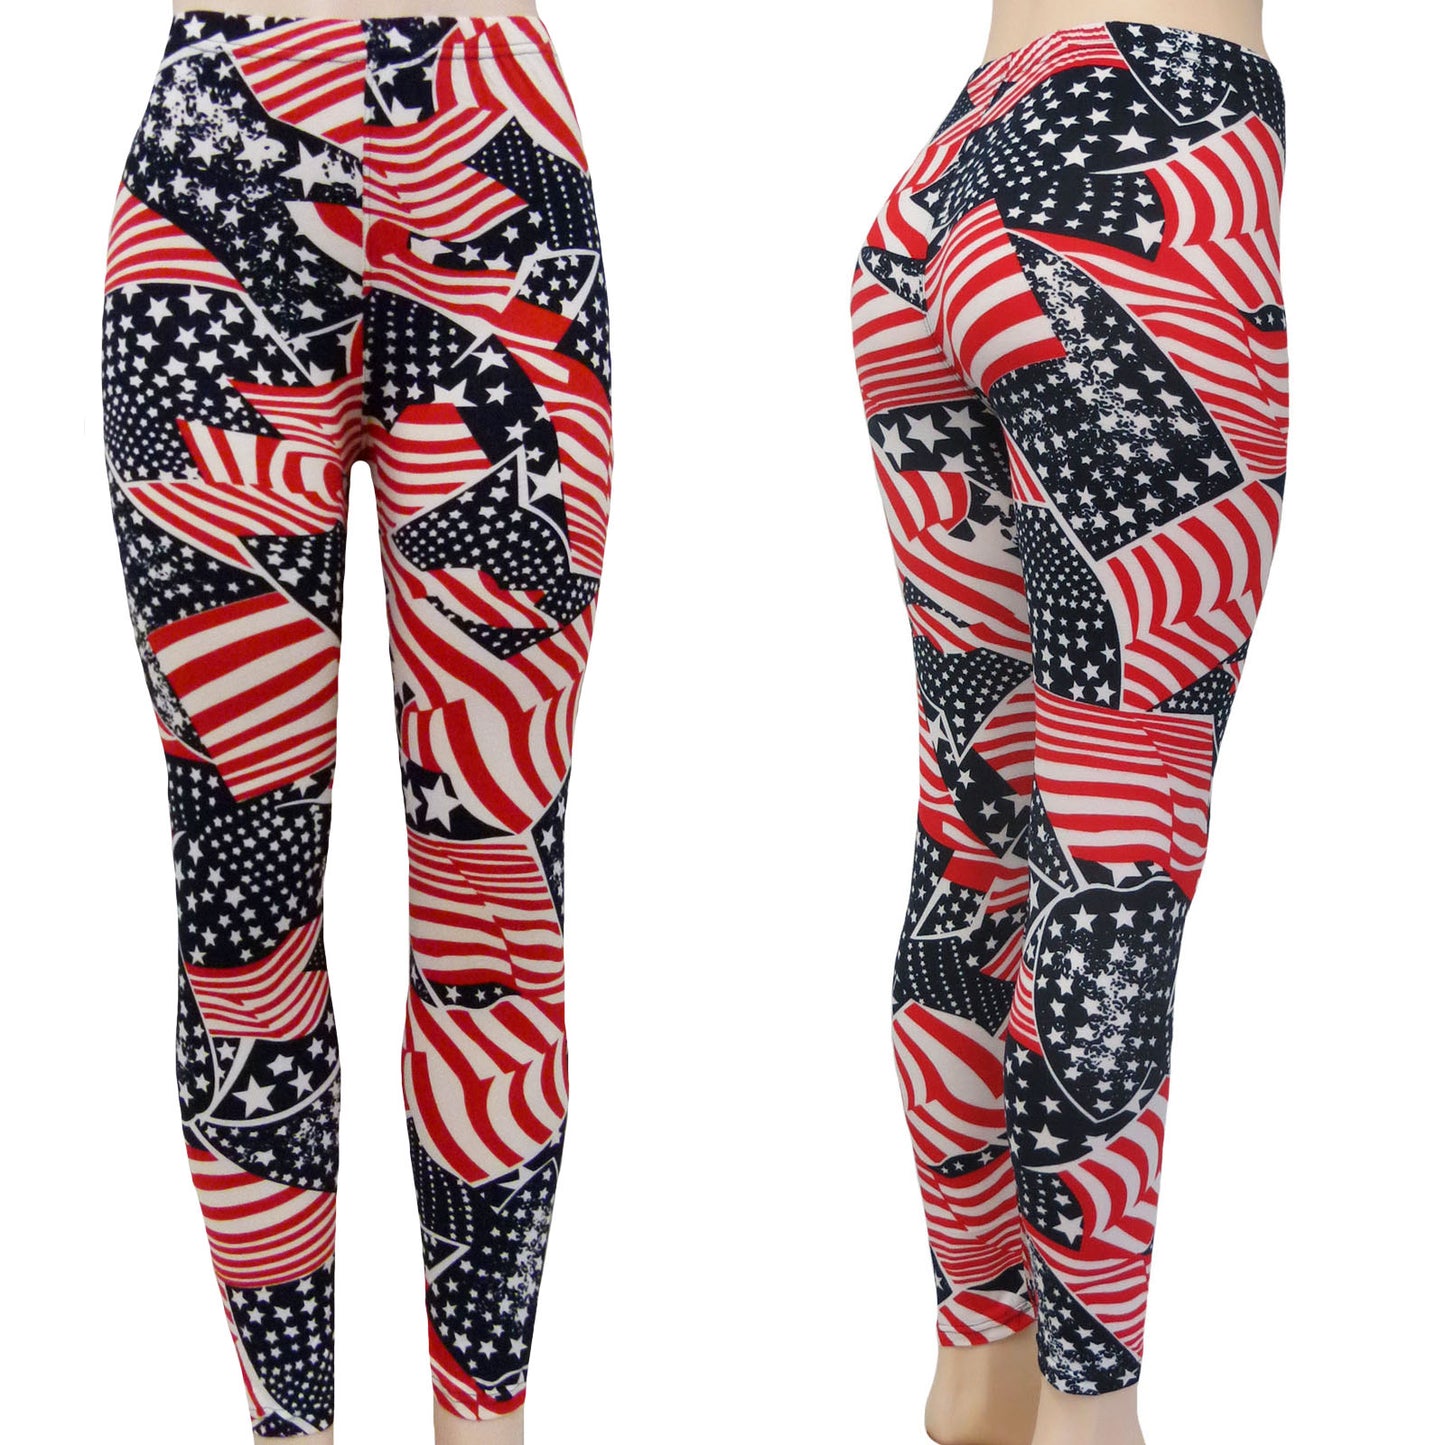 Wholesale USA Flag Leggings in Artistic Red White and Blue Stars and Stripes Design